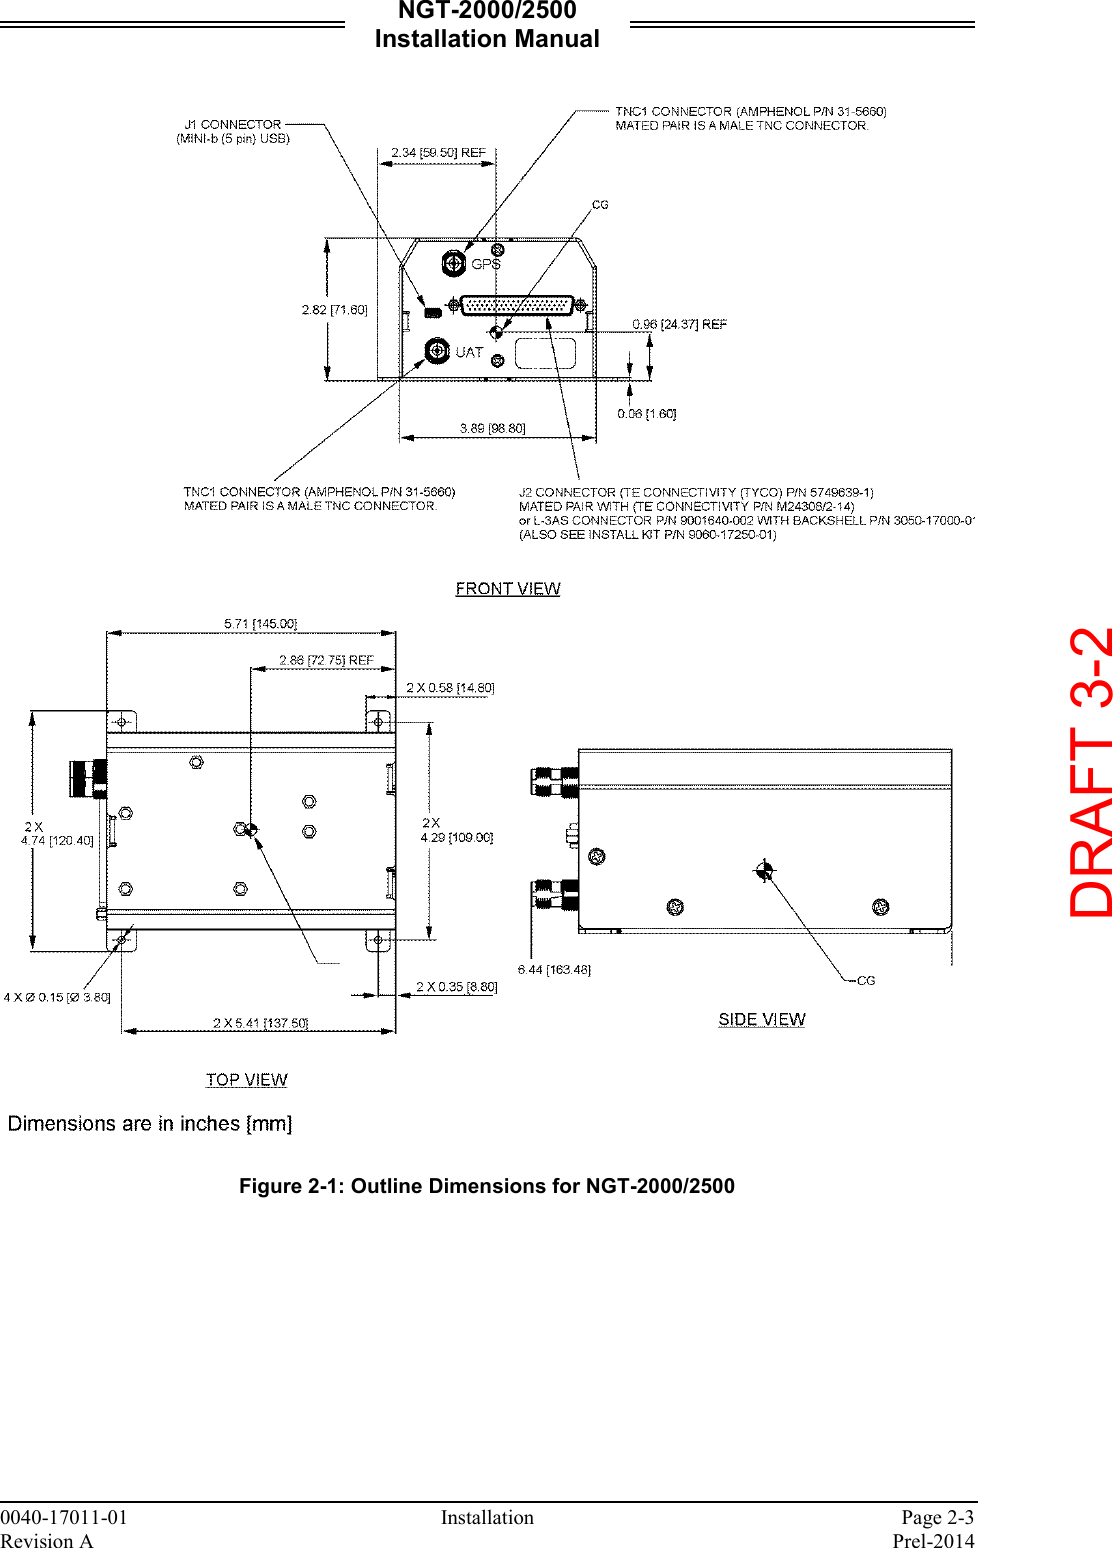 NGT-2000/2500 Installation Manual  0040-17011-01    Installation  Page 2-3 Revision A    Prel-2014    Figure 2-1: Outline Dimensions for NGT-2000/2500     DRAFT 3-2